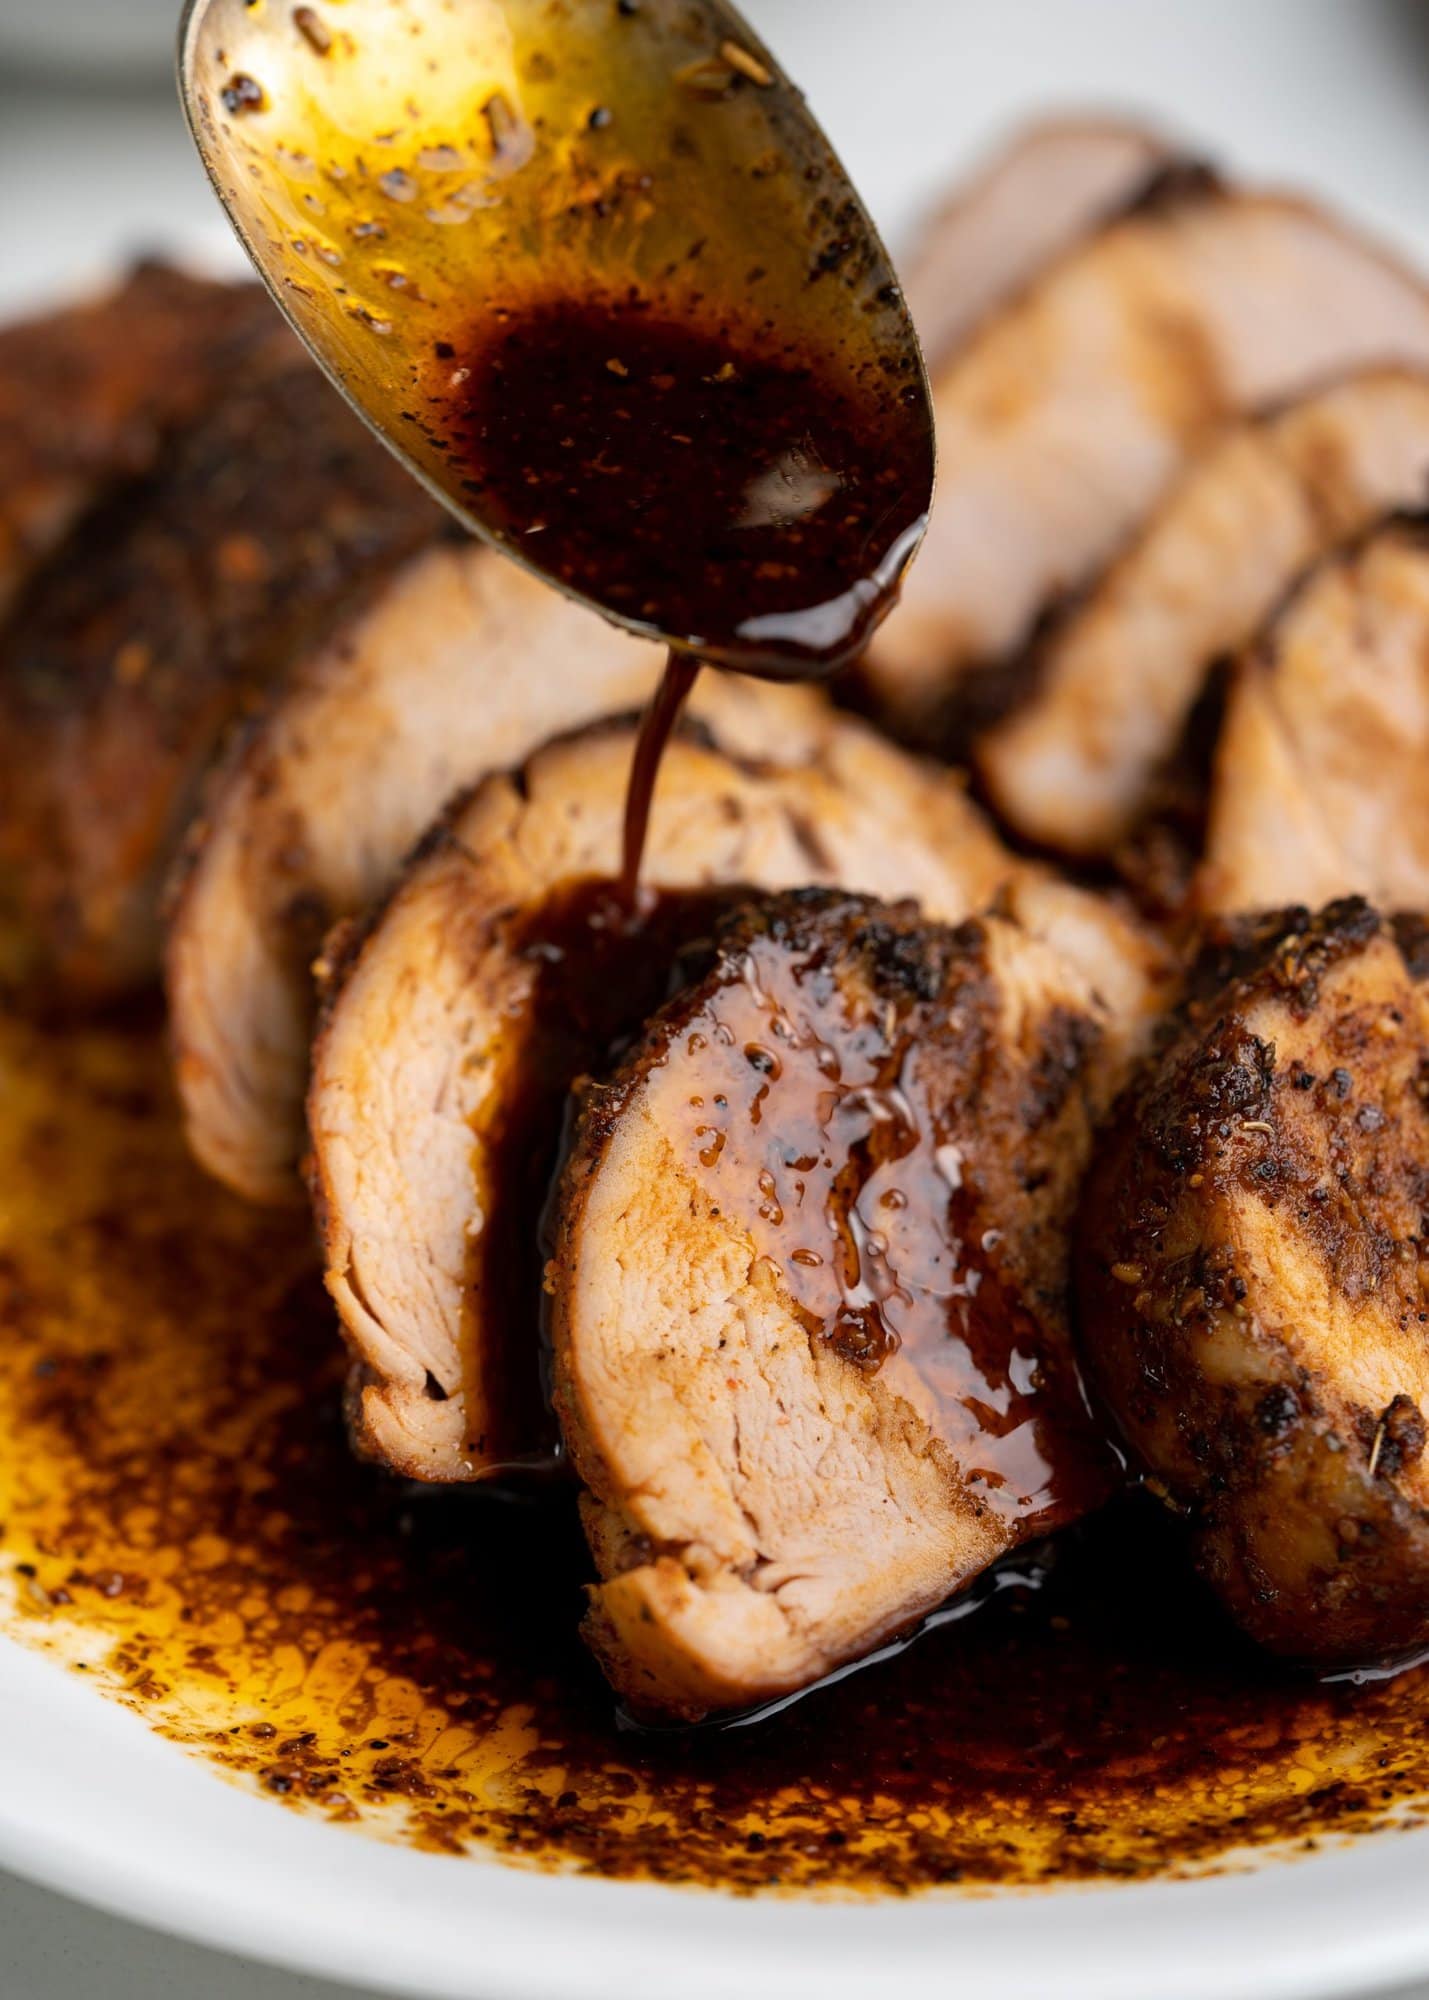 Dripping sauce over the stacked pork tenderloin slices.